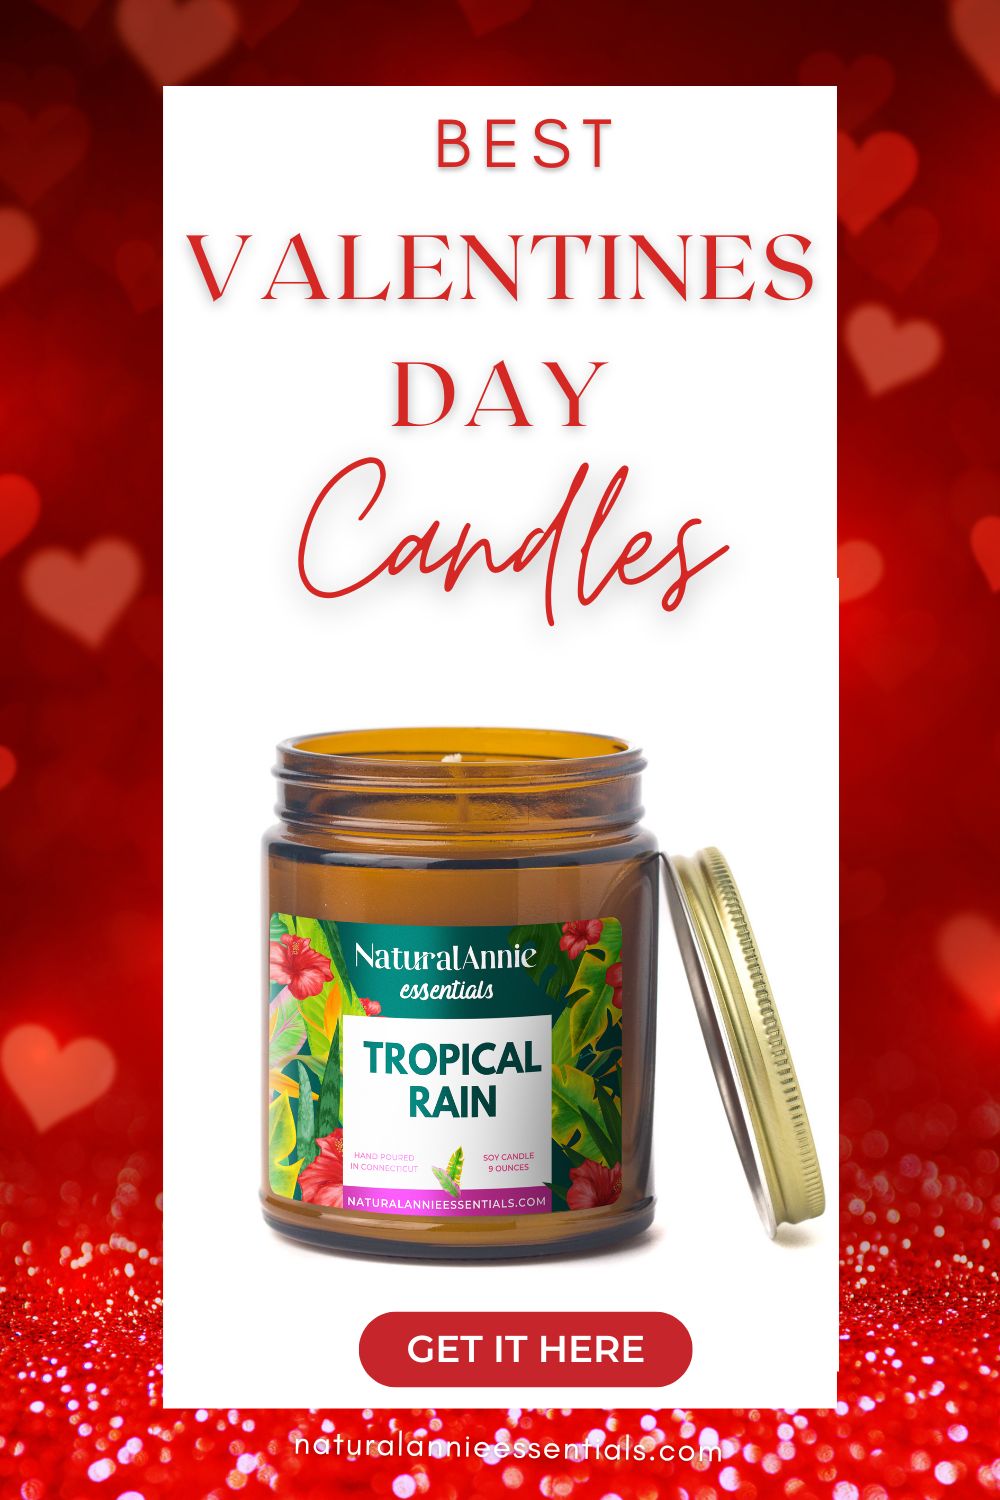 Tropical Rain Scented Soy Candle 9OZ for valentines day